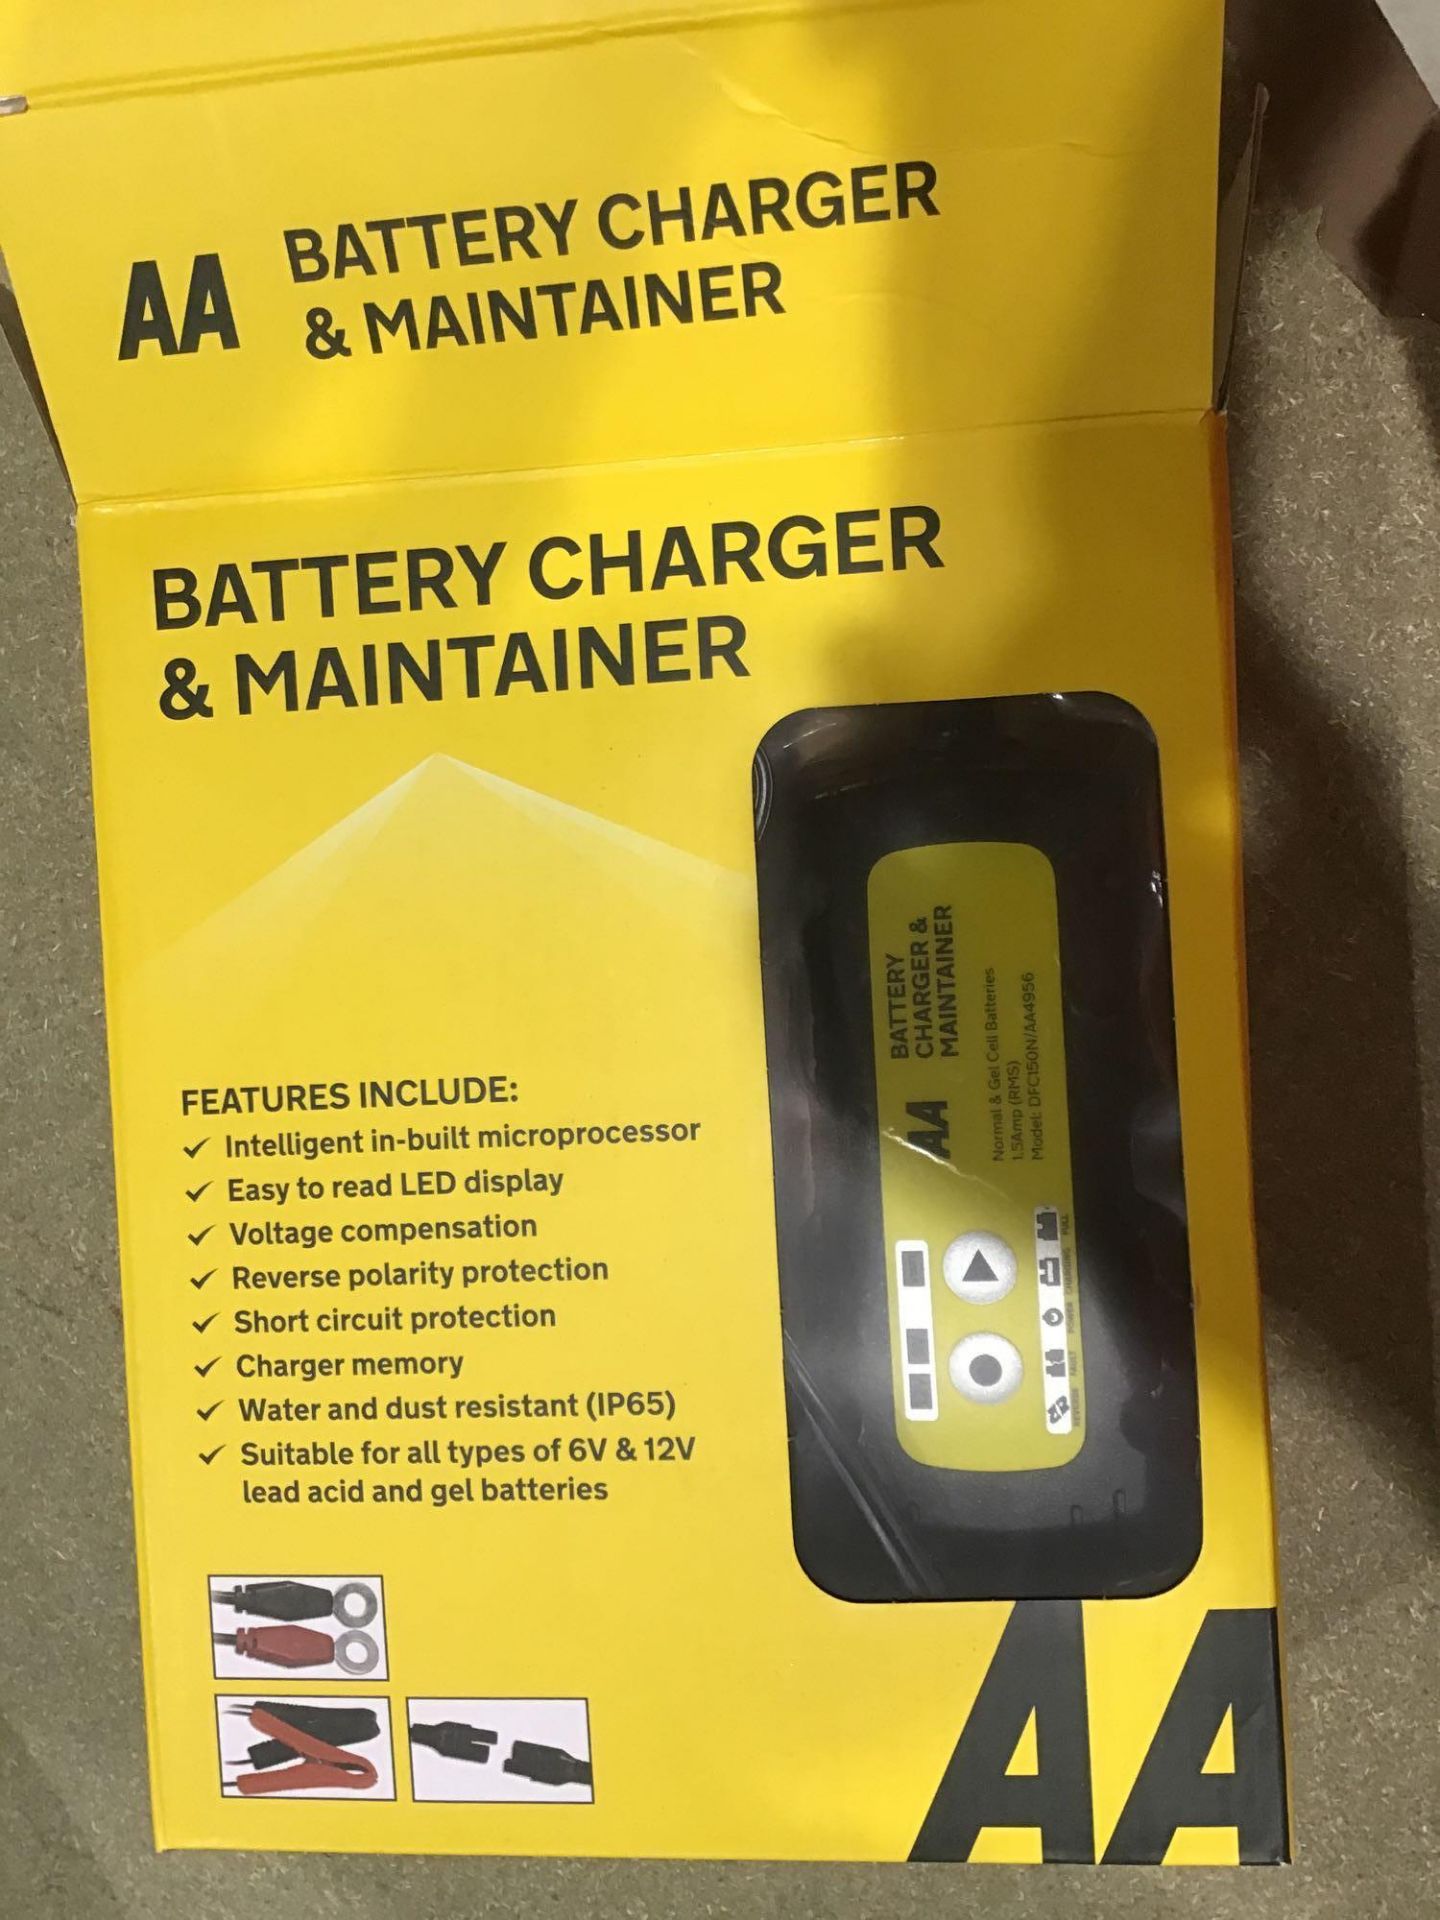 AA 1.5 Amp 6 V/12 V Car Battery Charger Maintainer AA4956 UK Plug Fully Automatic - £27.45 RRP - Image 2 of 4